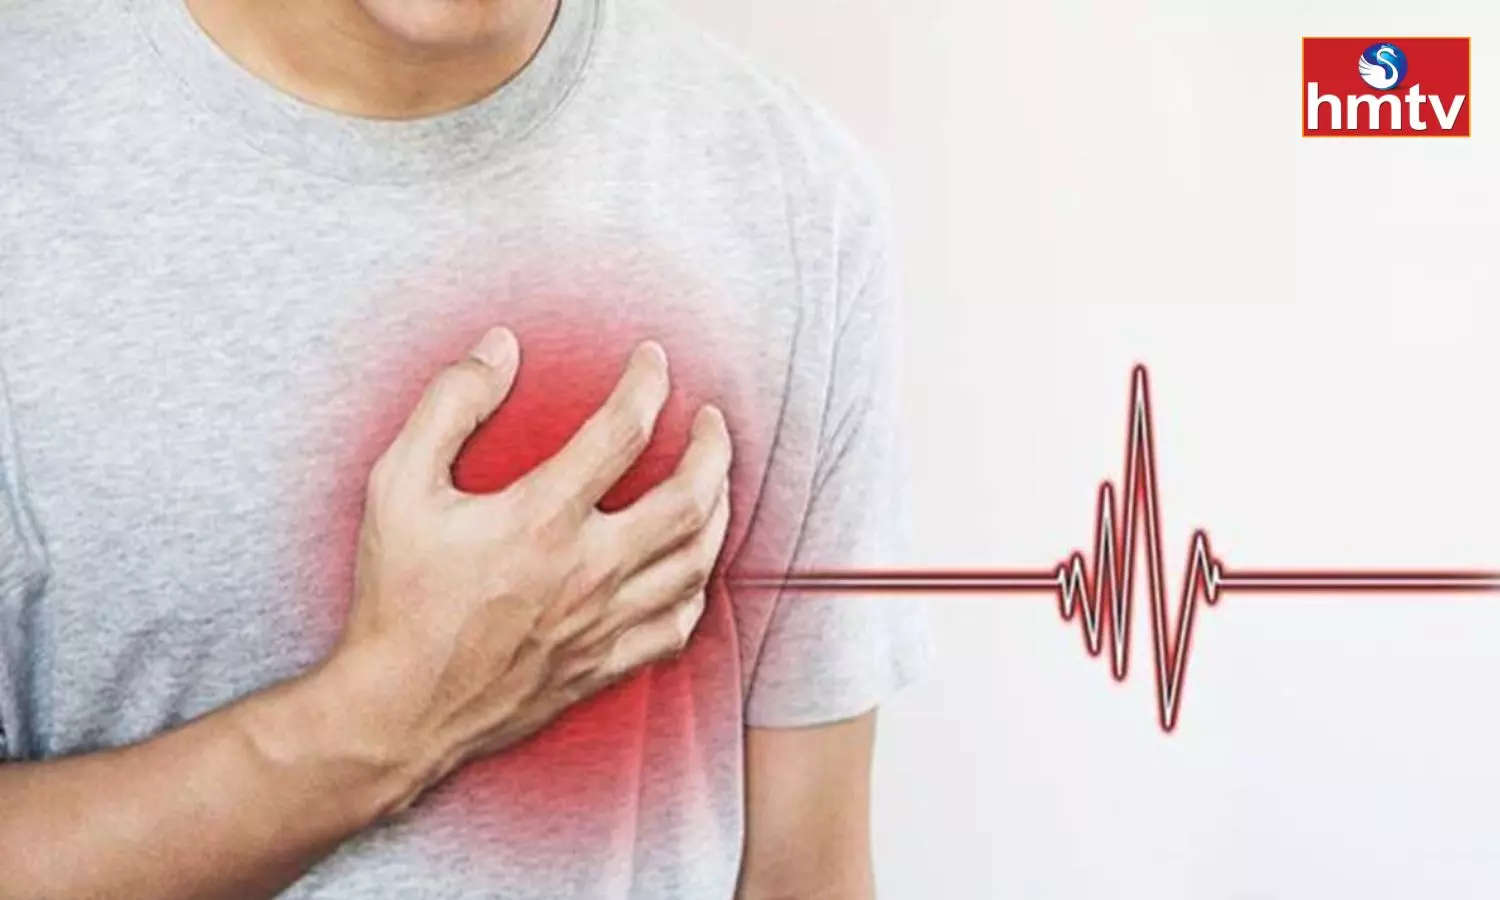 Men are More at Risk of Heart Problems This Happens due to Fatigue and Stress